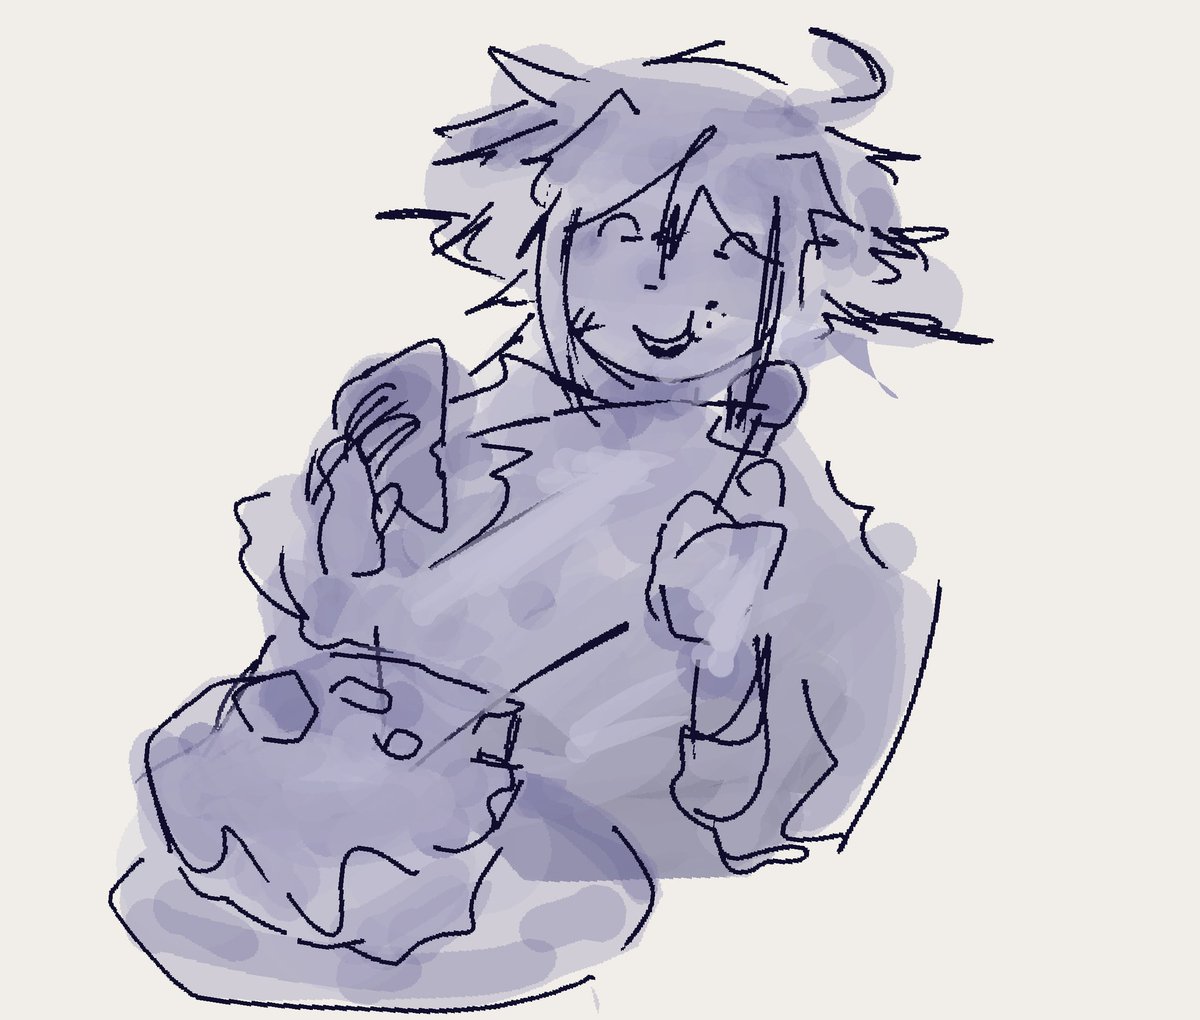 Ceres eating Asteroid cake :33
I just realized, isn't that cannibalism
#solarballs #solarballsart